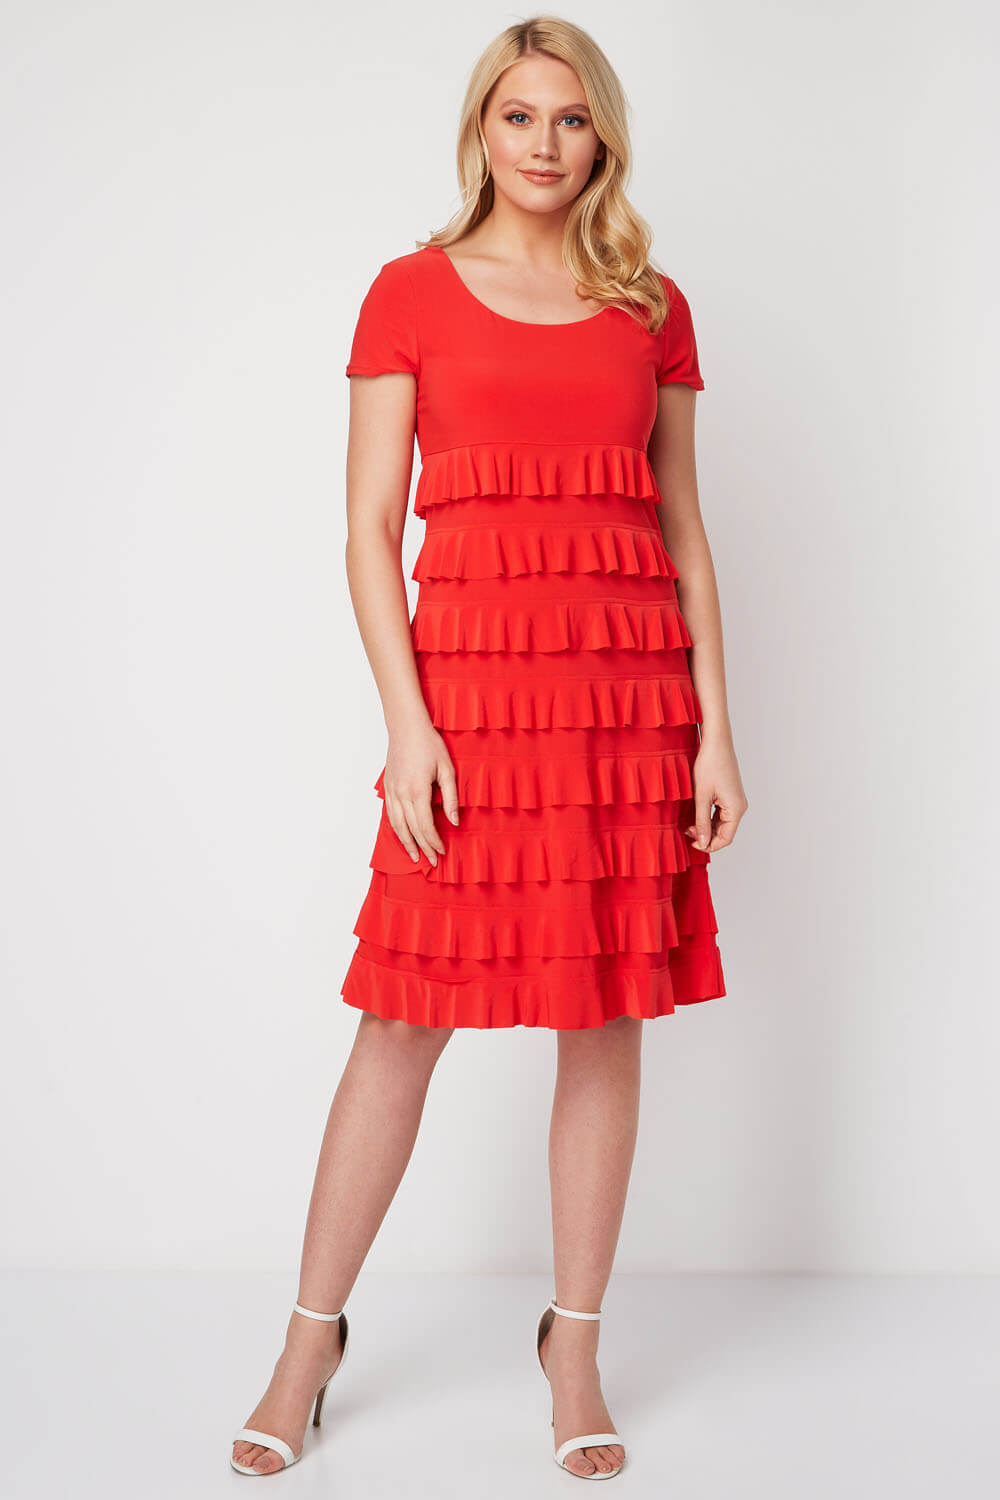 Red  Frill Tiered Dress, Image 2 of 5